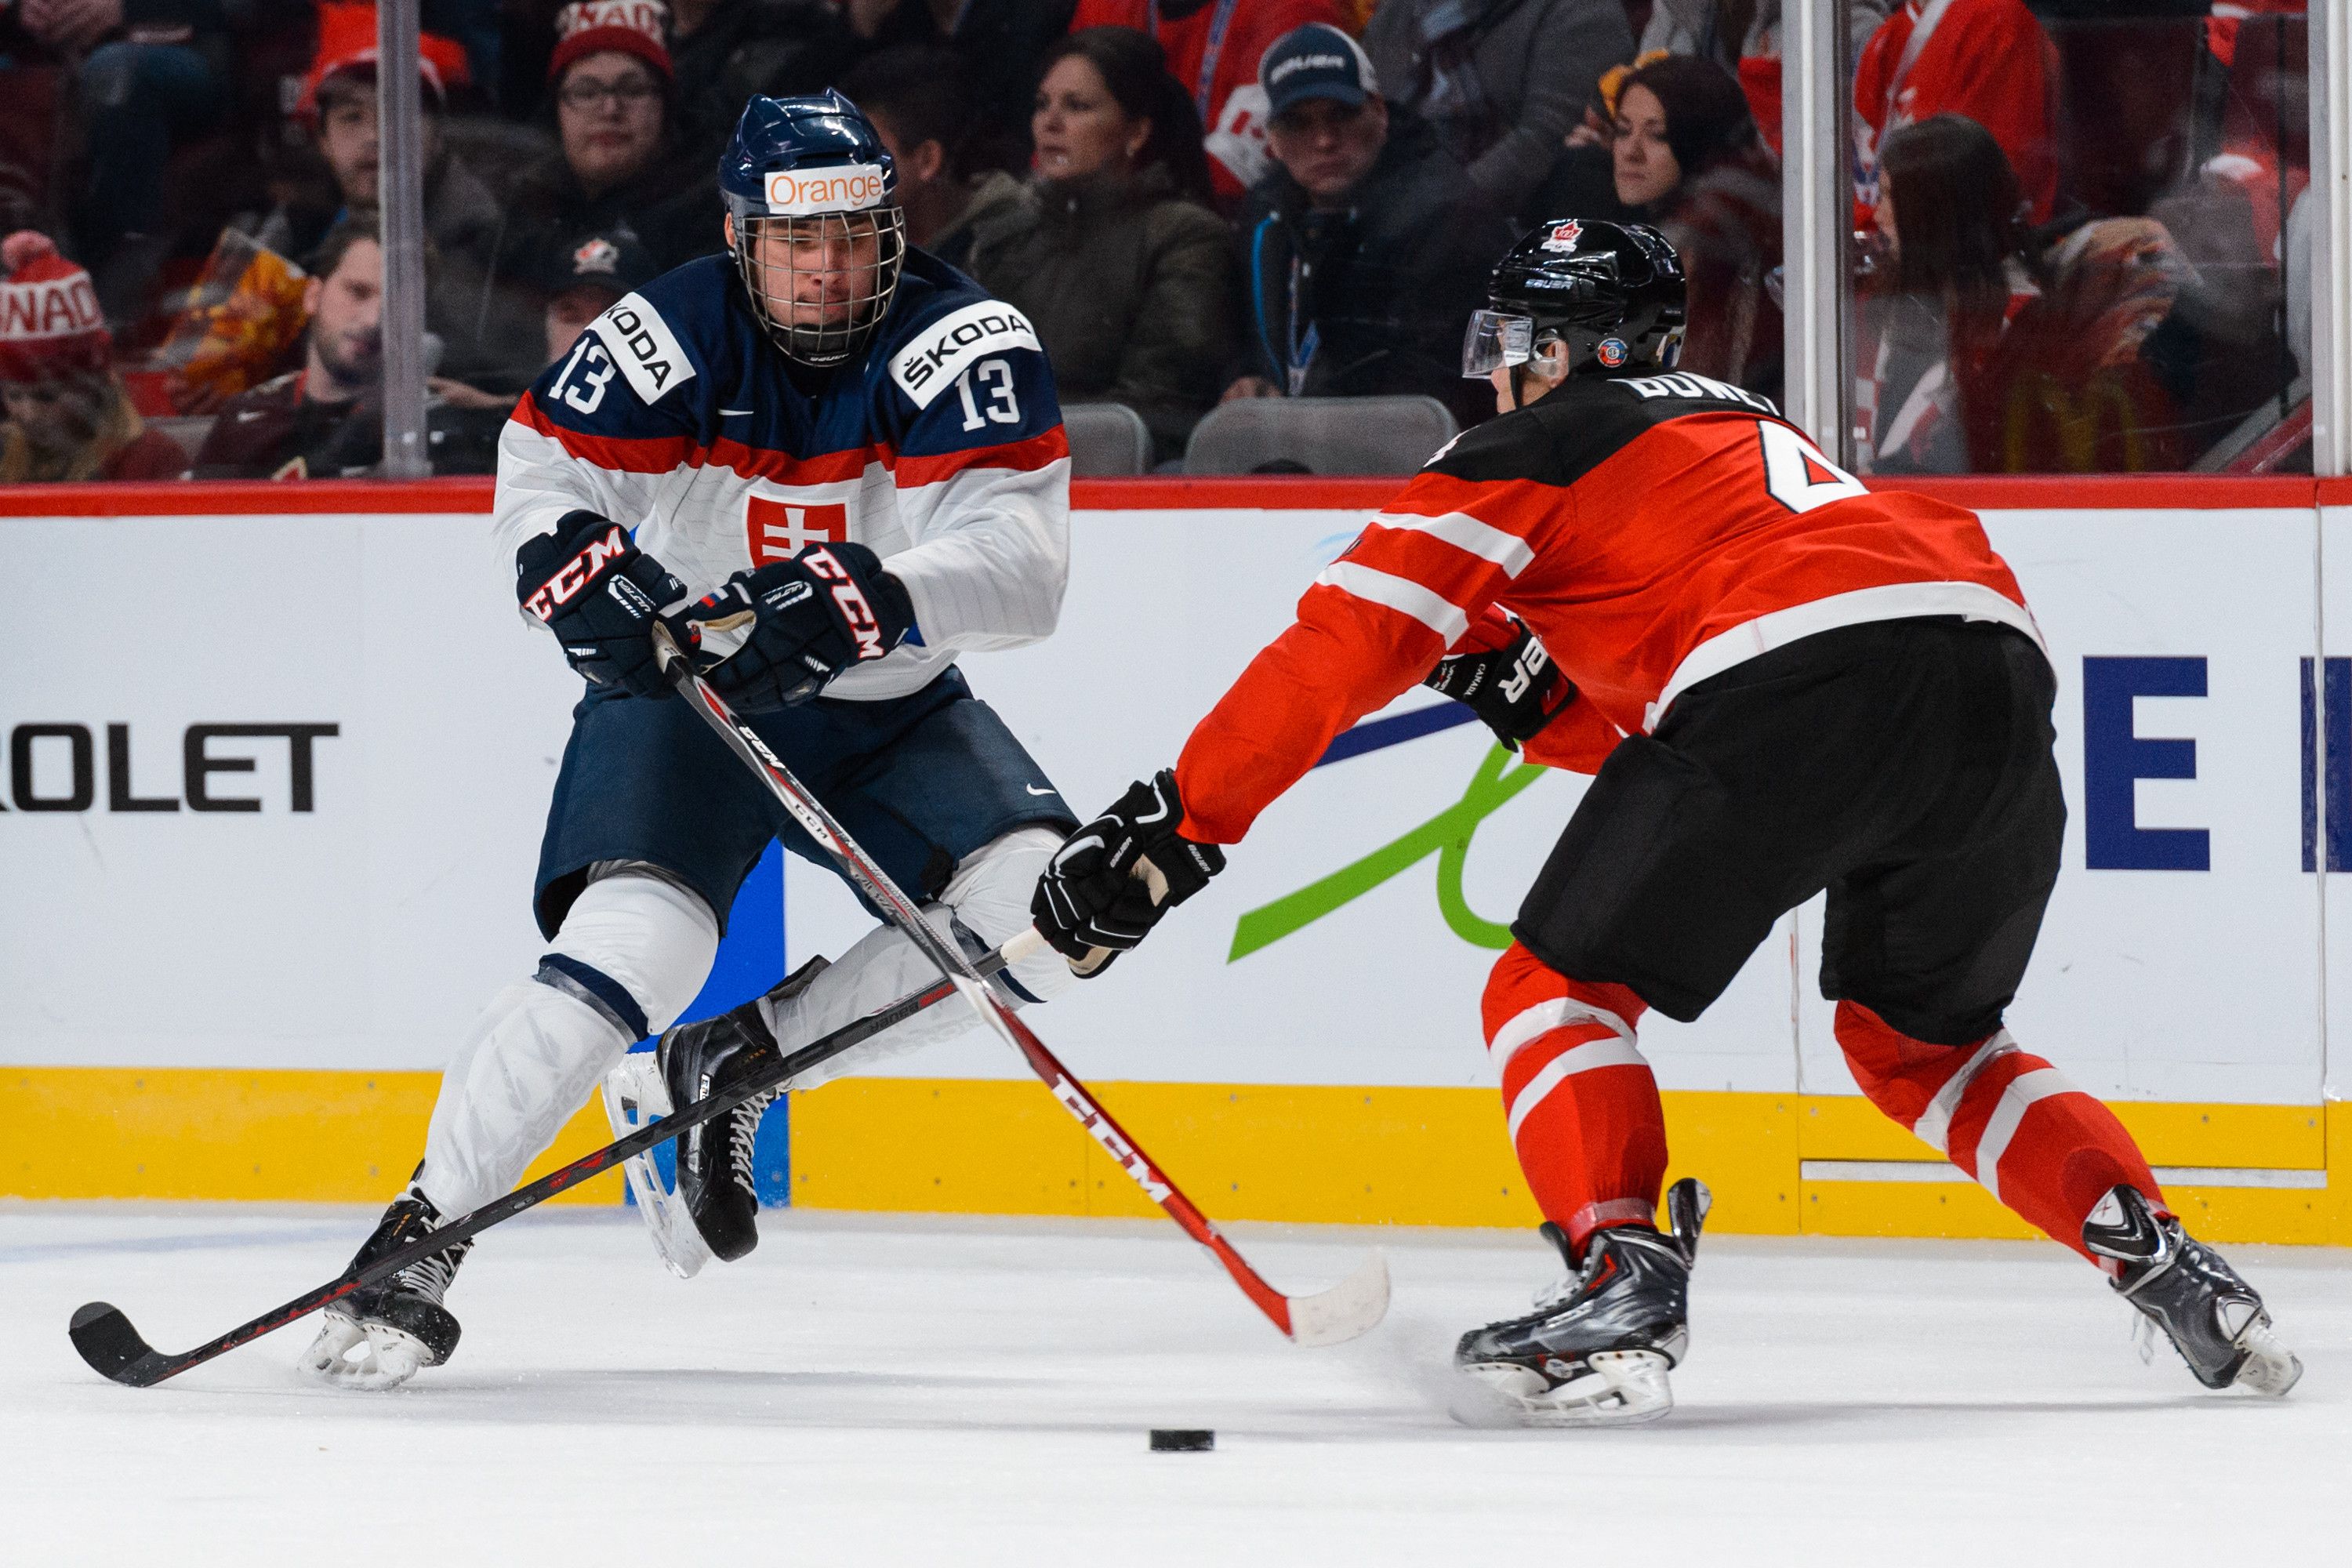 MONTREAL, QC - DECEMBER 26:  Radovan Bondra #13 of Team Slovakia carries the puck near Madison Bowey #4 of Team Canada during the 2015 IIHF World Junior Hockey Championship game at the Bell Centre on December 26, 2014 in Montreal, Quebec, Canada.  (Photo by Minas Panagiotakis/Getty Images)